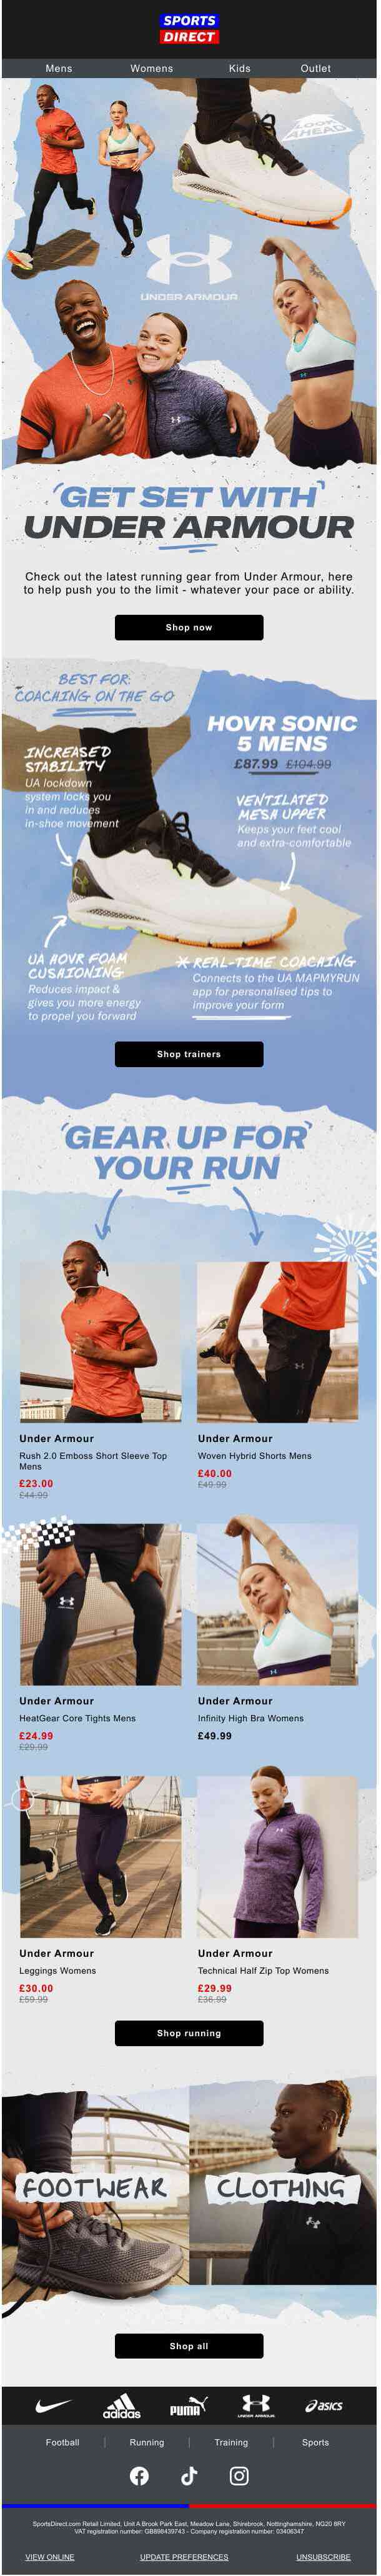 Get Set...GO With Under Armour